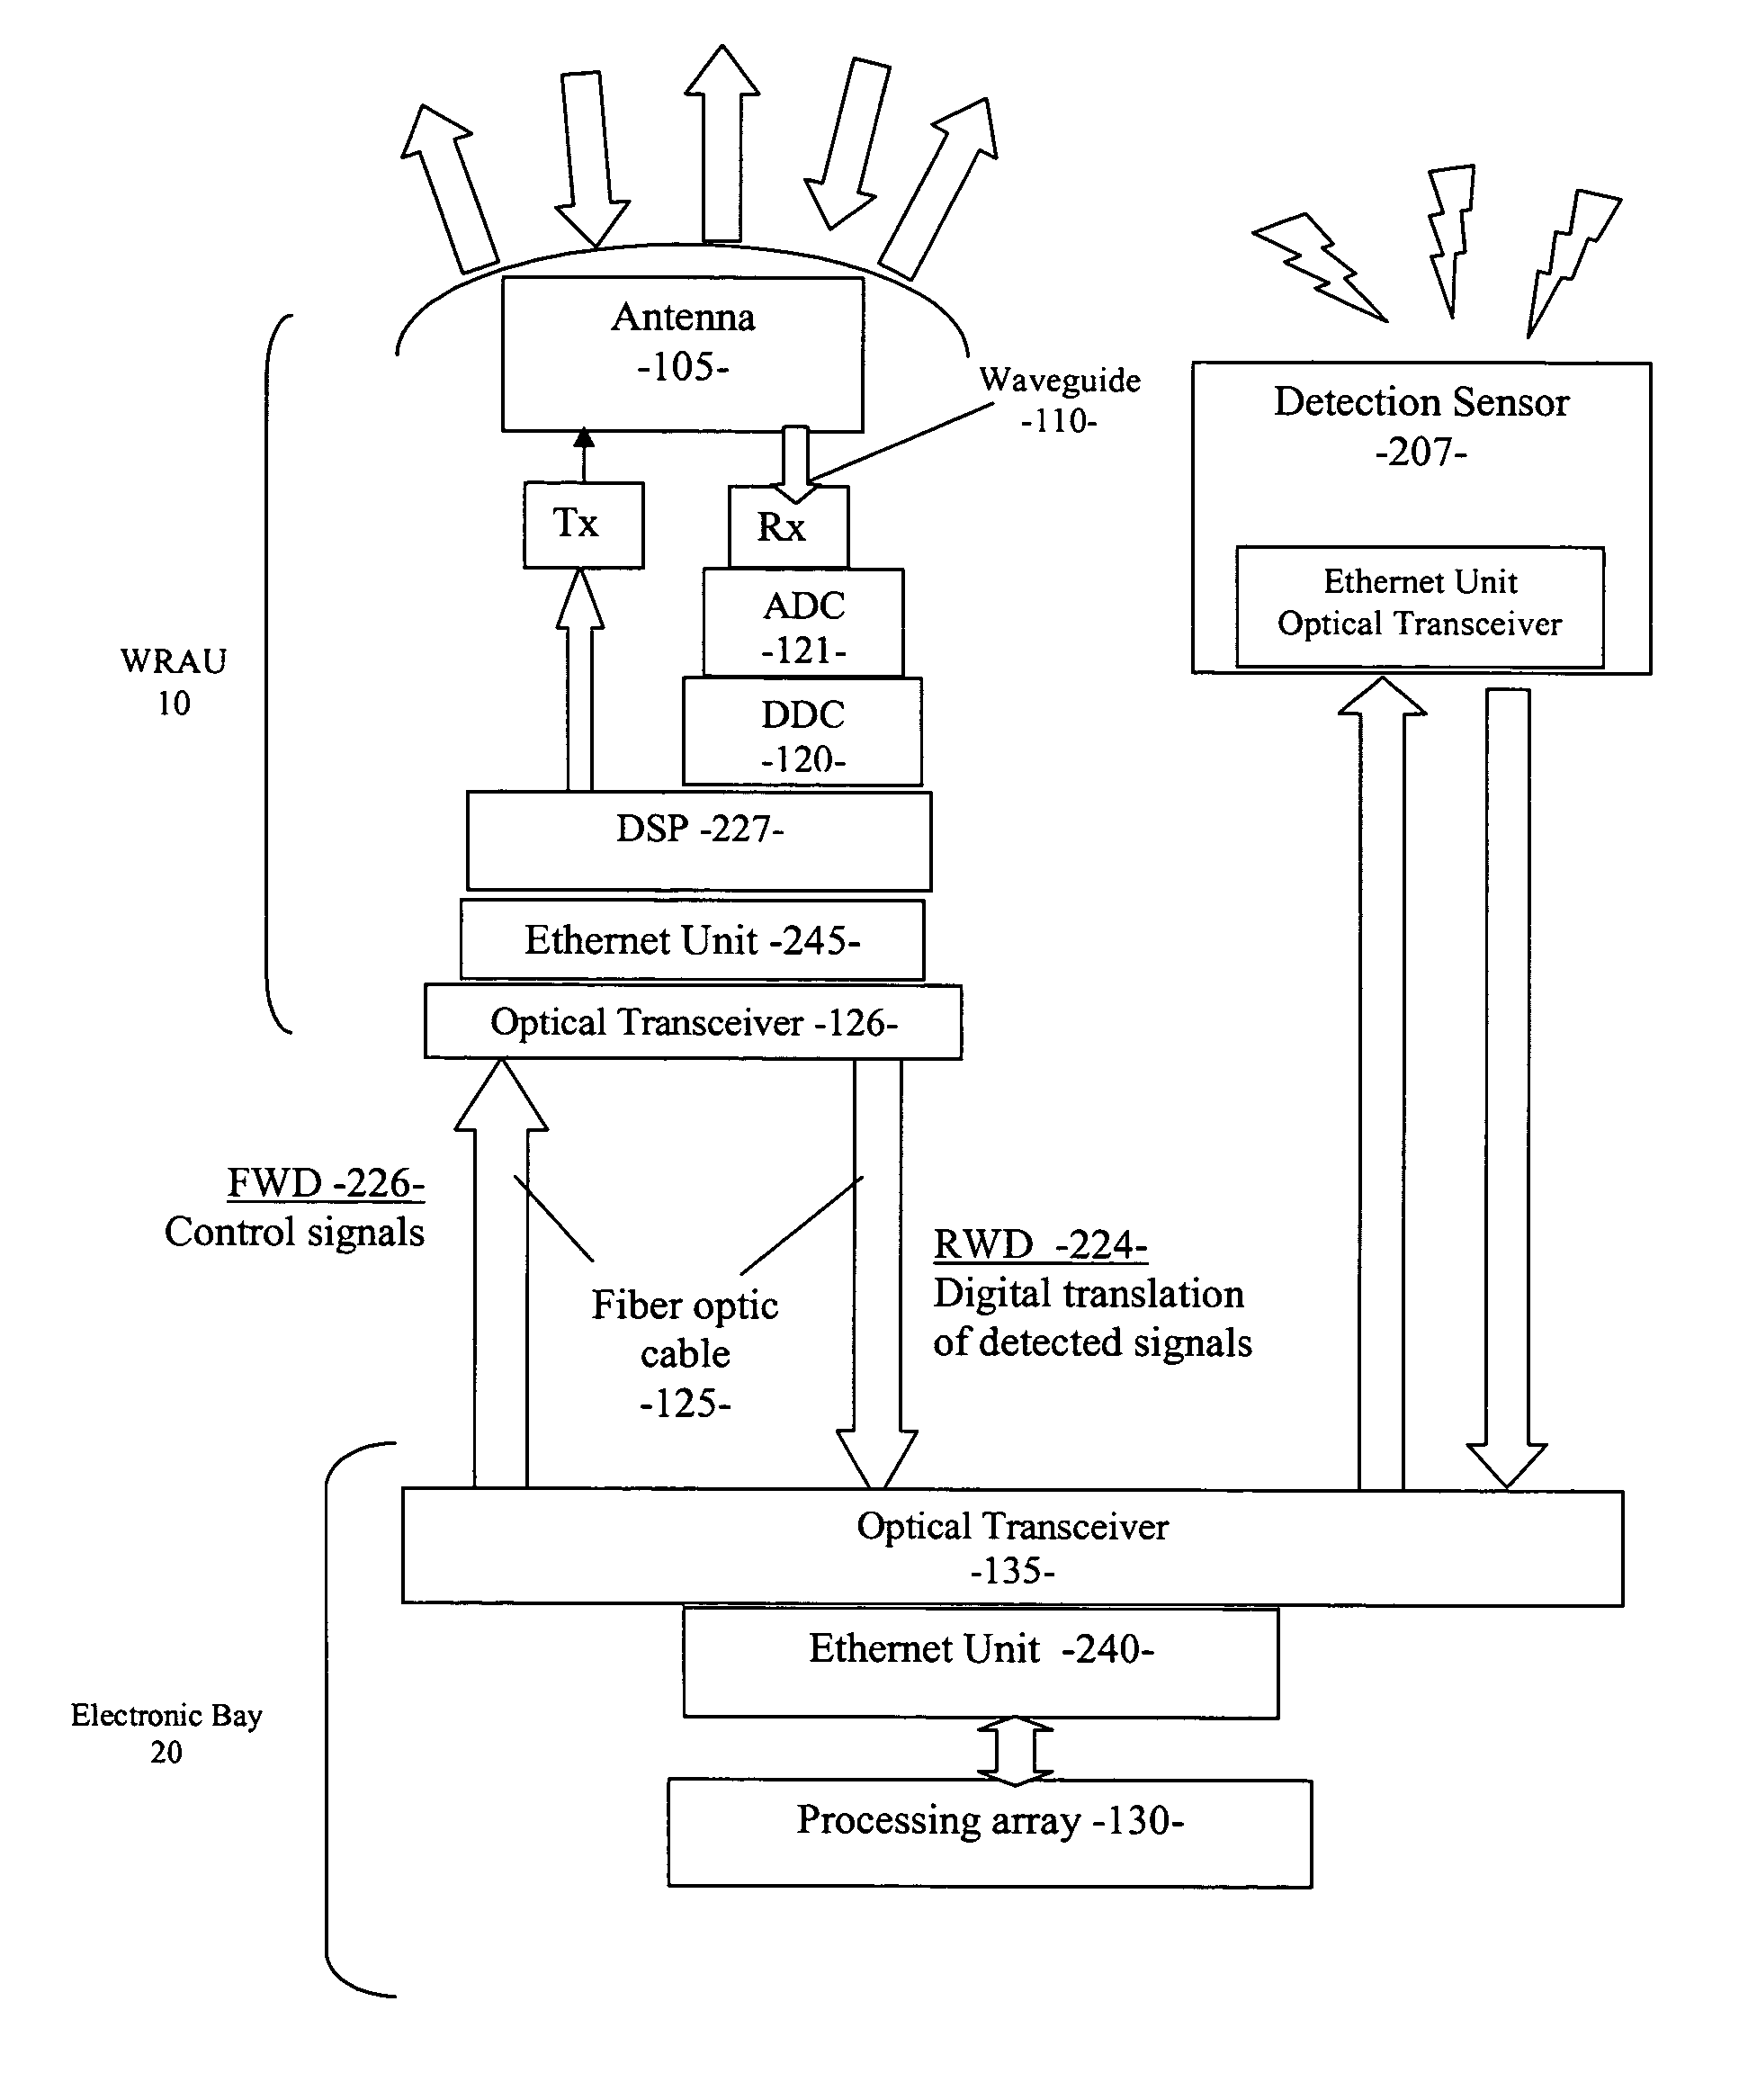 Ethernet connection of airborne radar over fiber optic cable